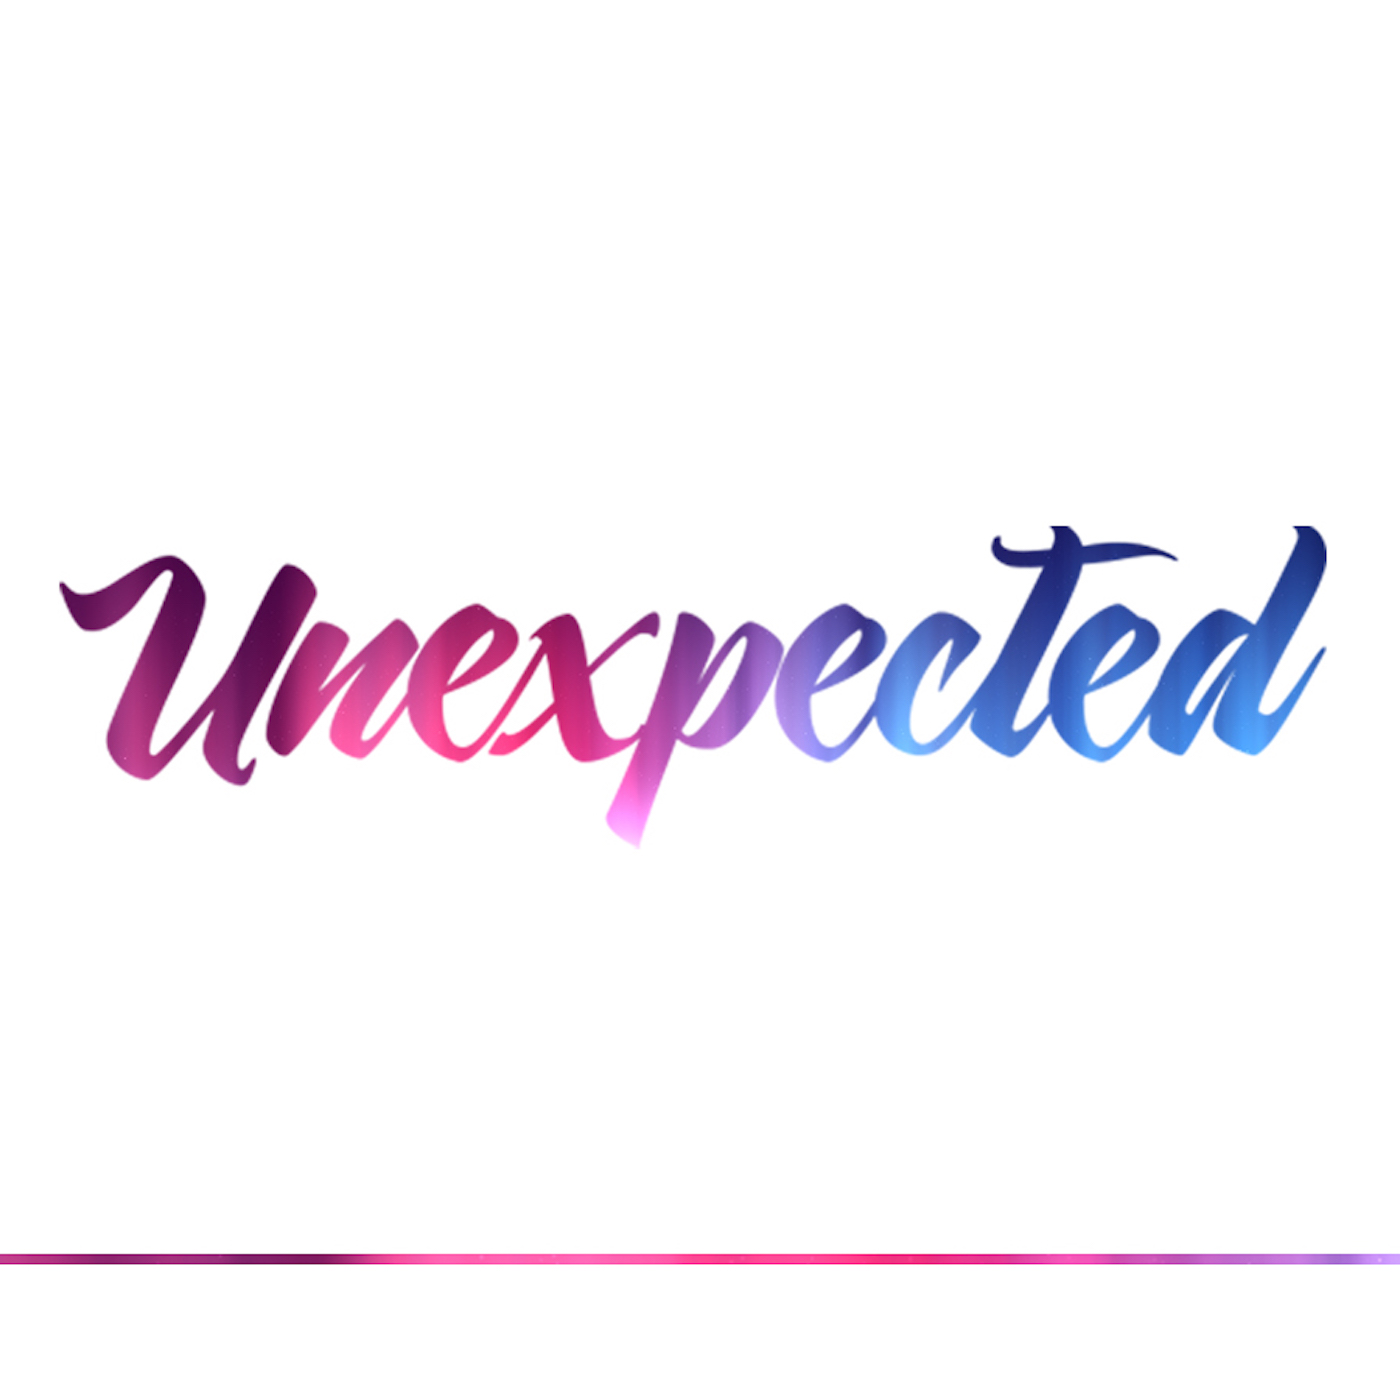 Unexpected - Week 8